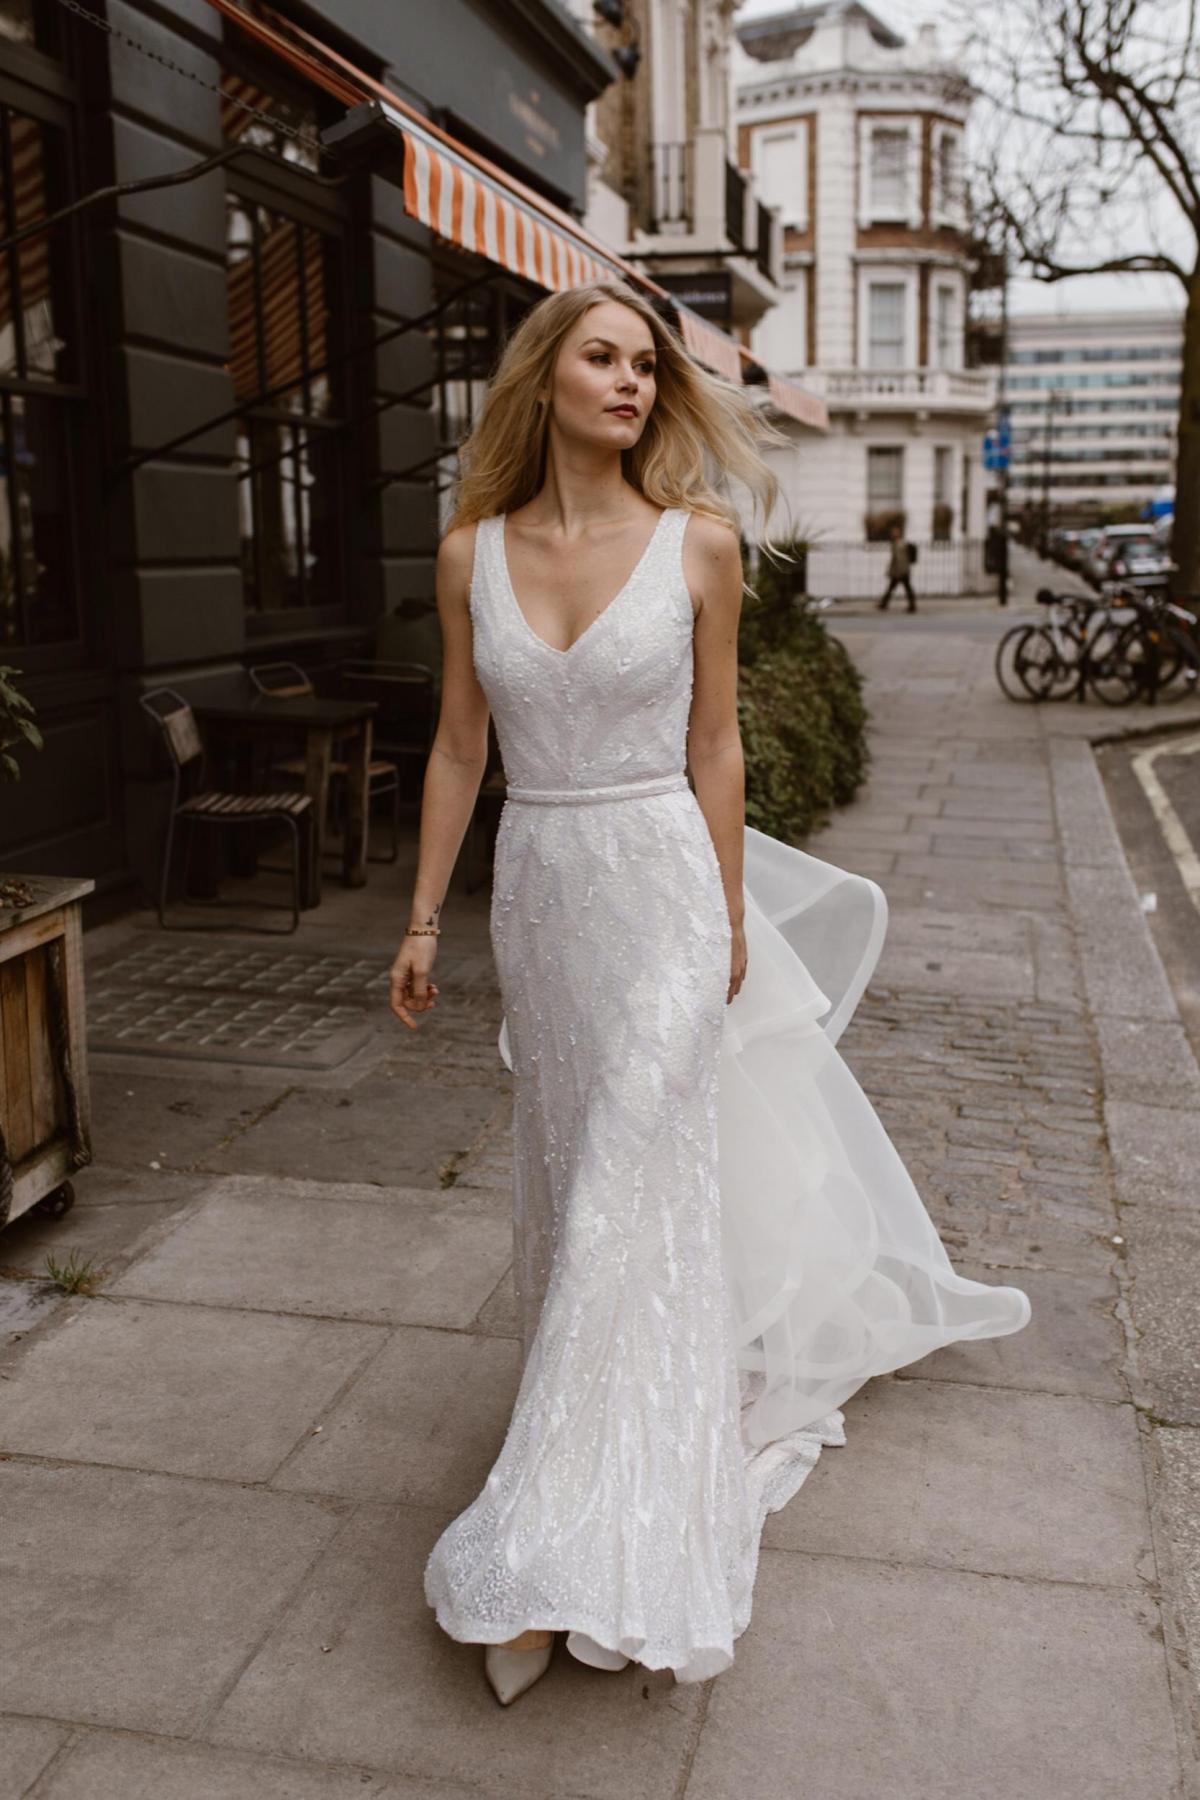 The Rhiannon gown by Karen Willis Holmes, v-neck beaded wedding dress shown with detachable train.